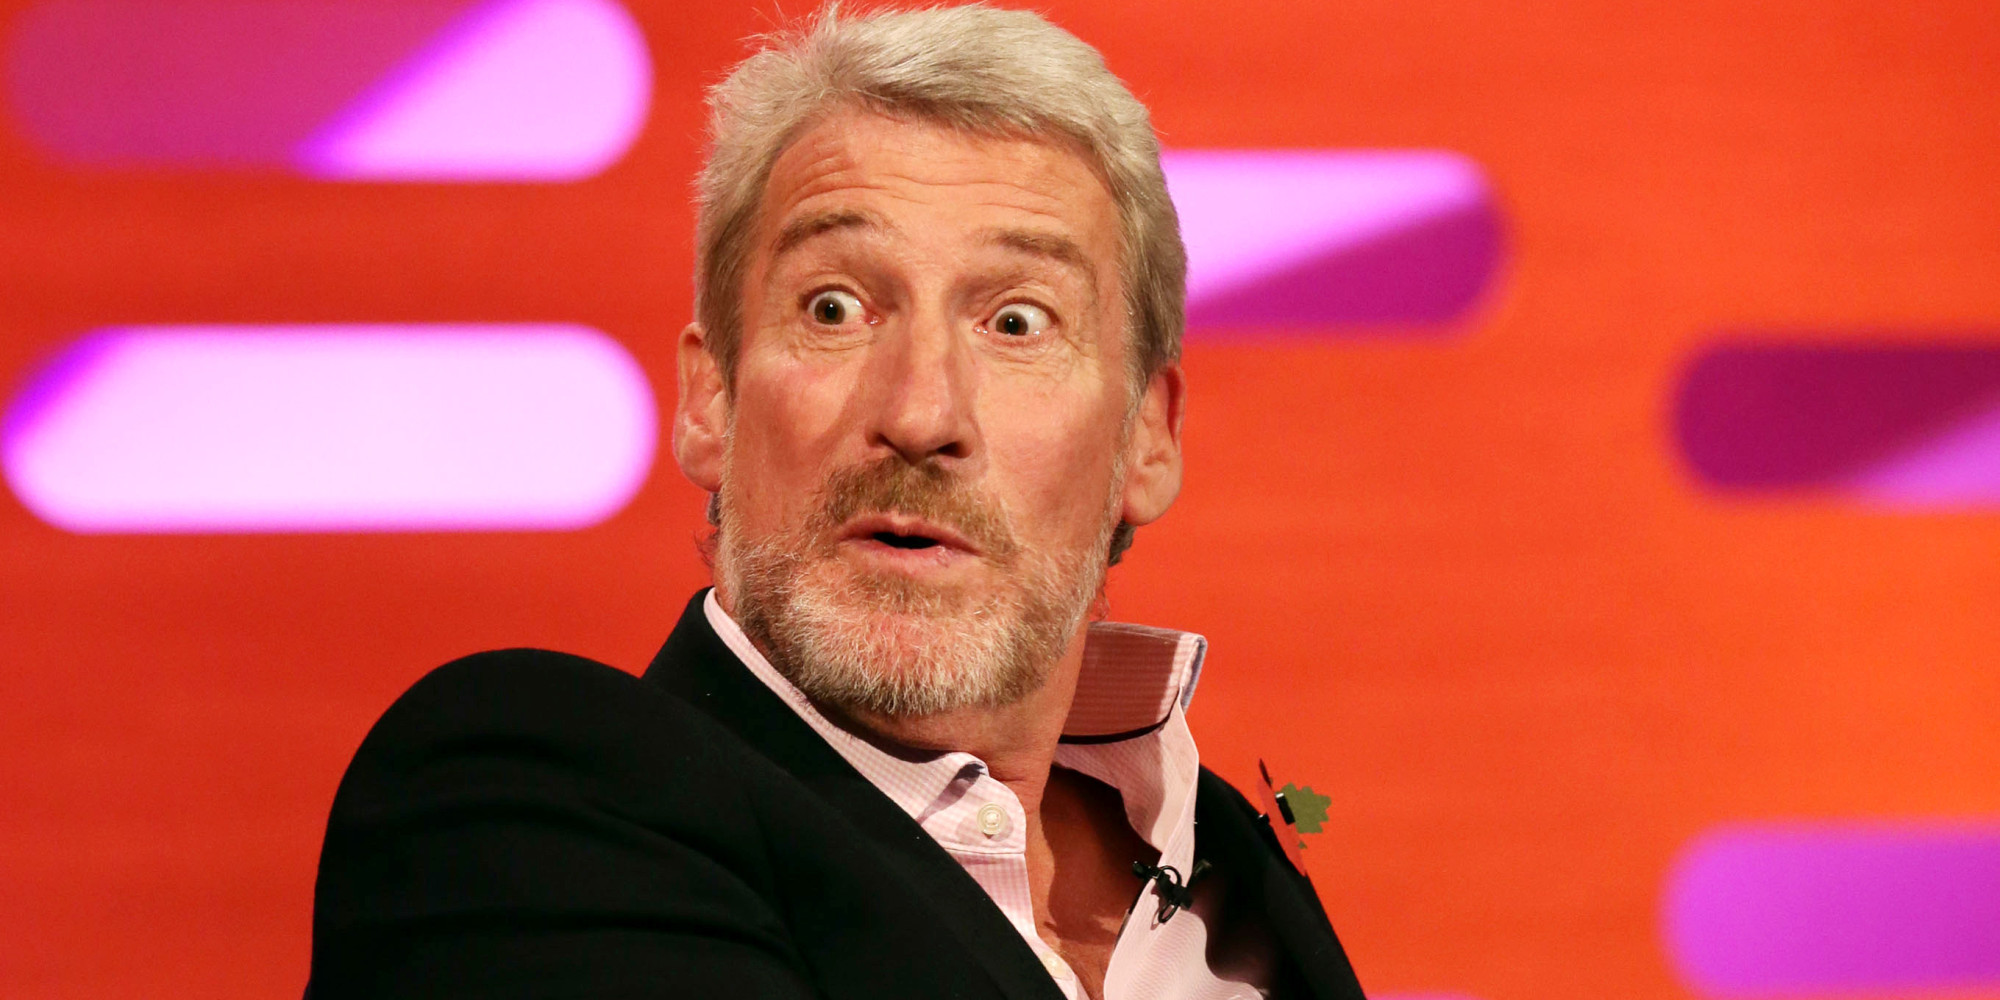 Image result for jeremy paxman idiot